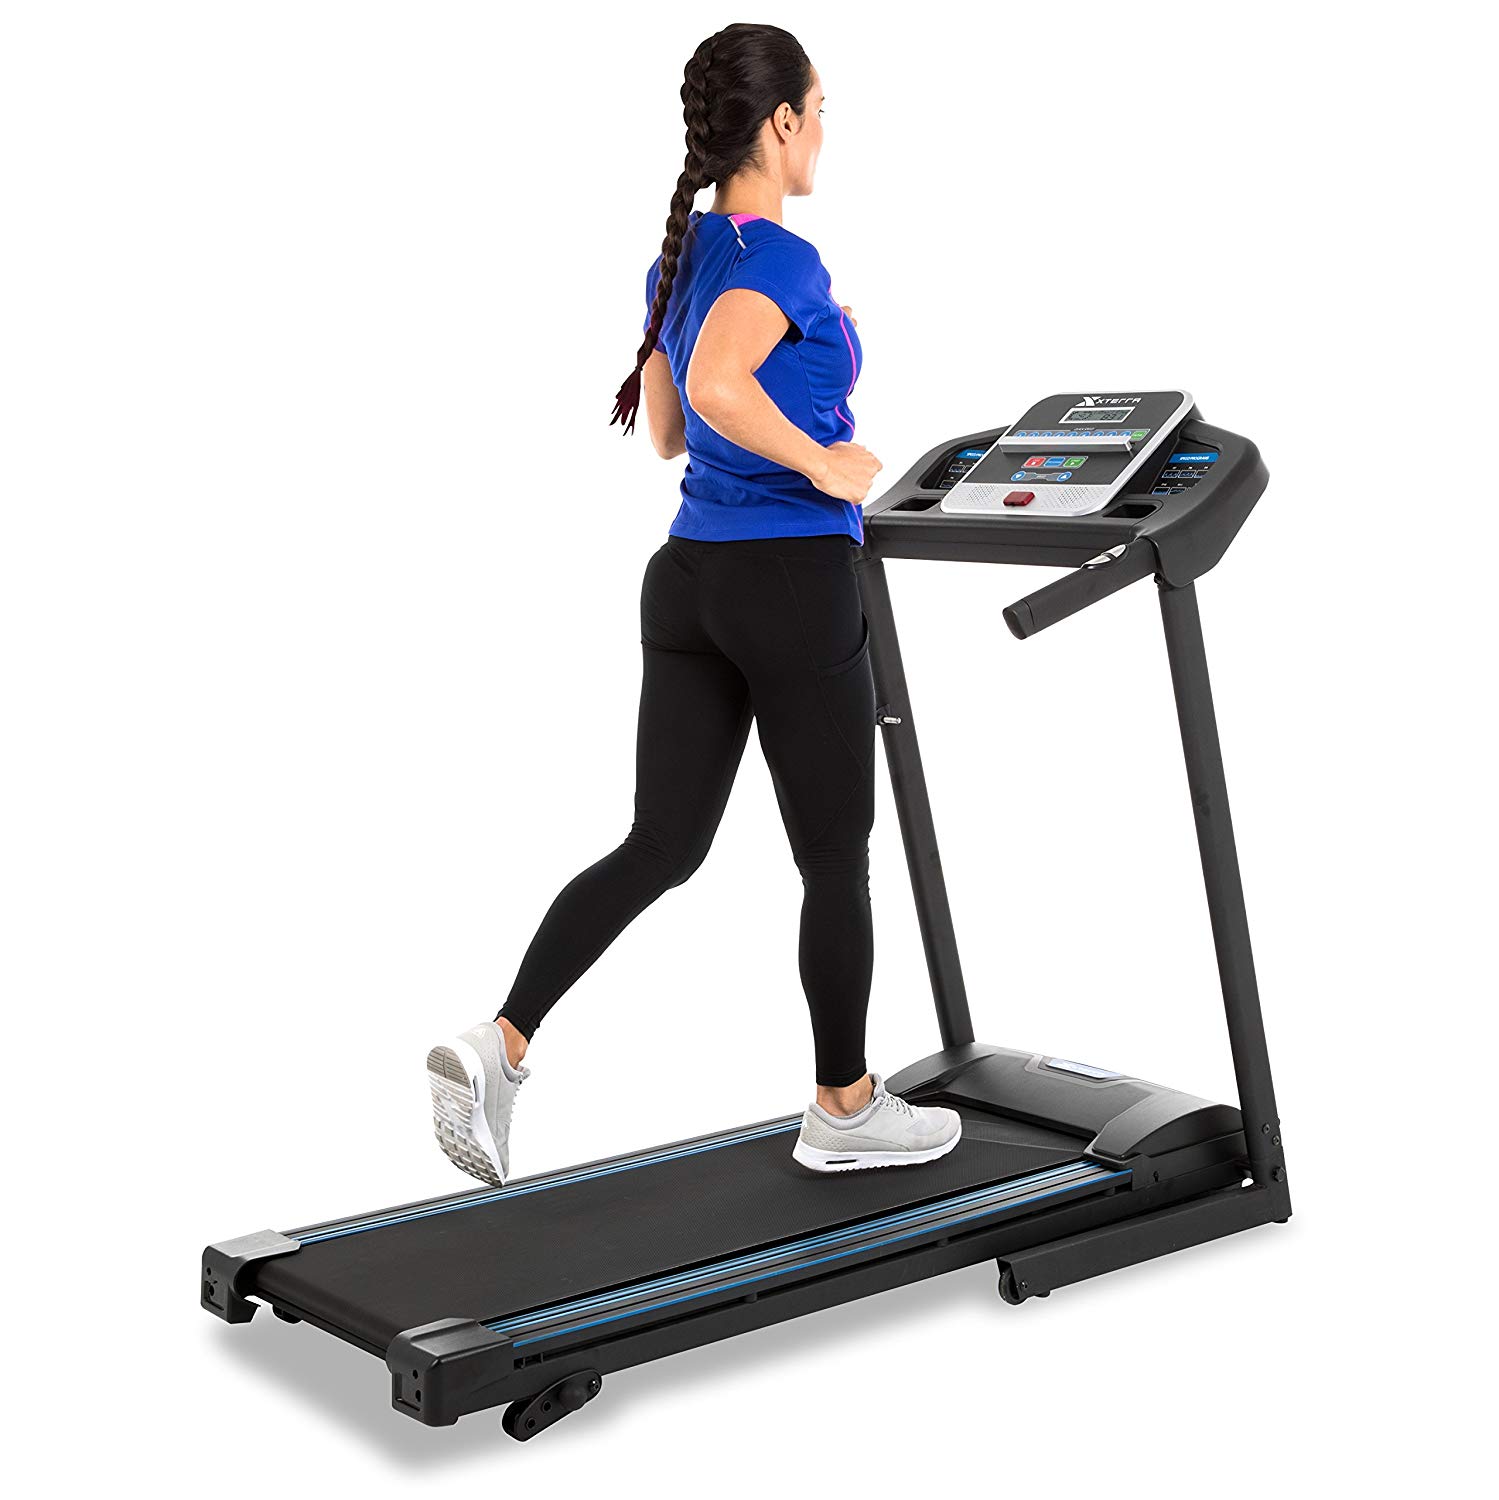 How to choose a treadmill? Best treadmills for home - Best treadmill